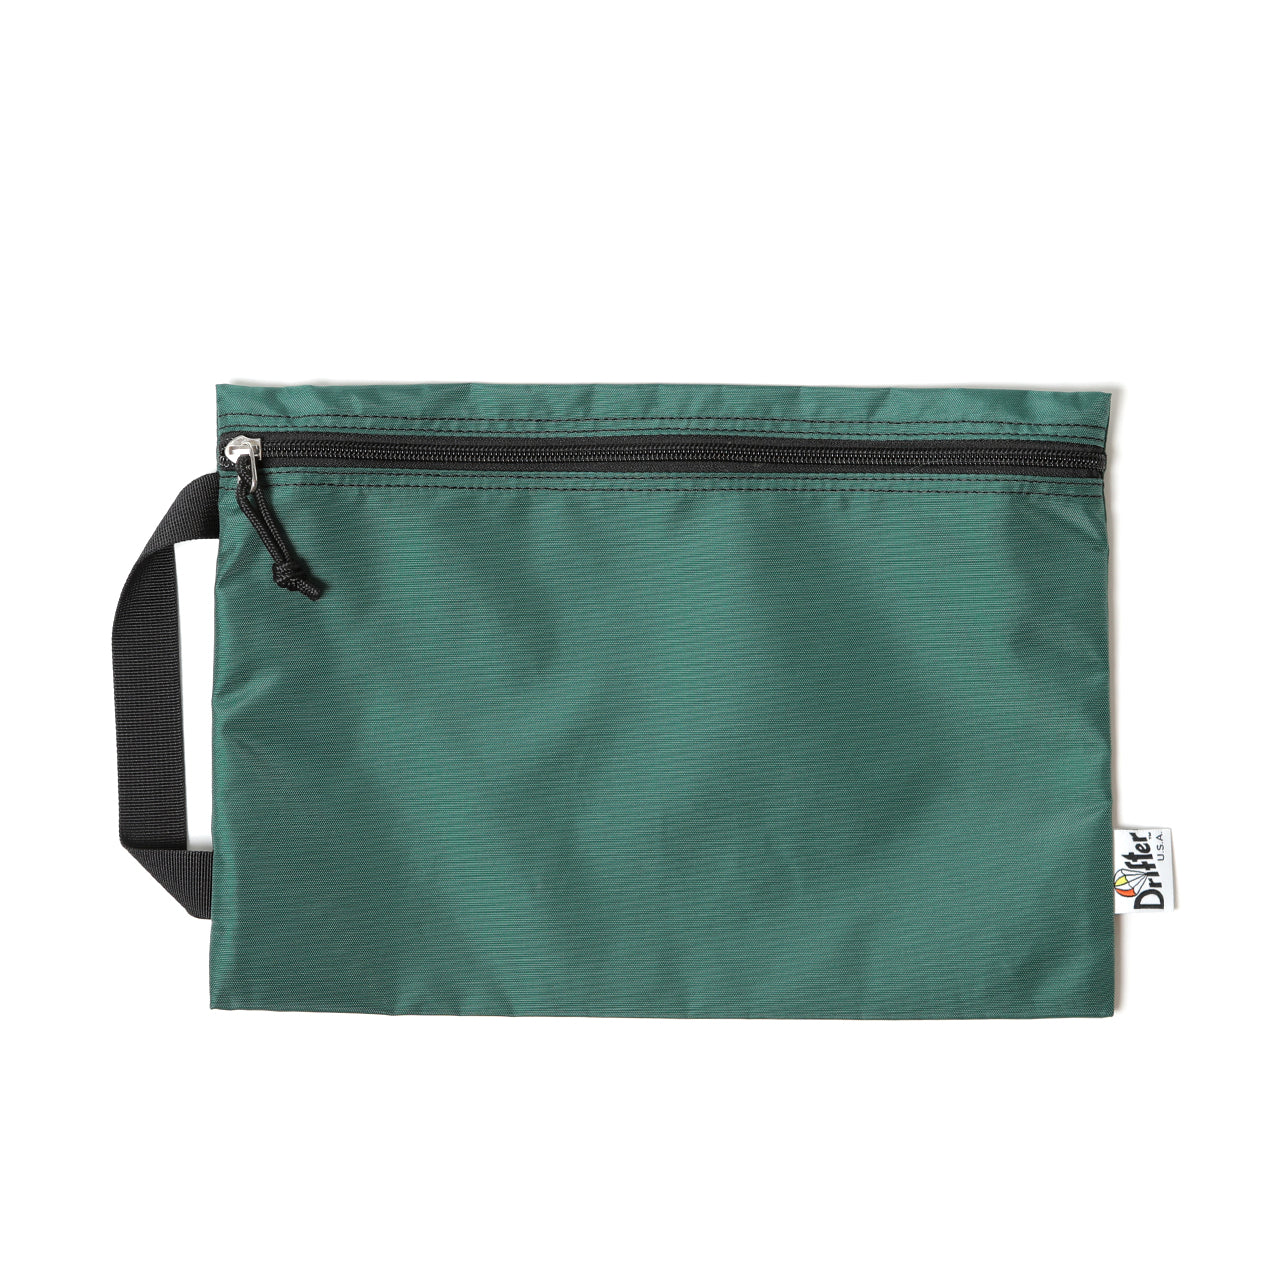 DOCUMENT POUCH